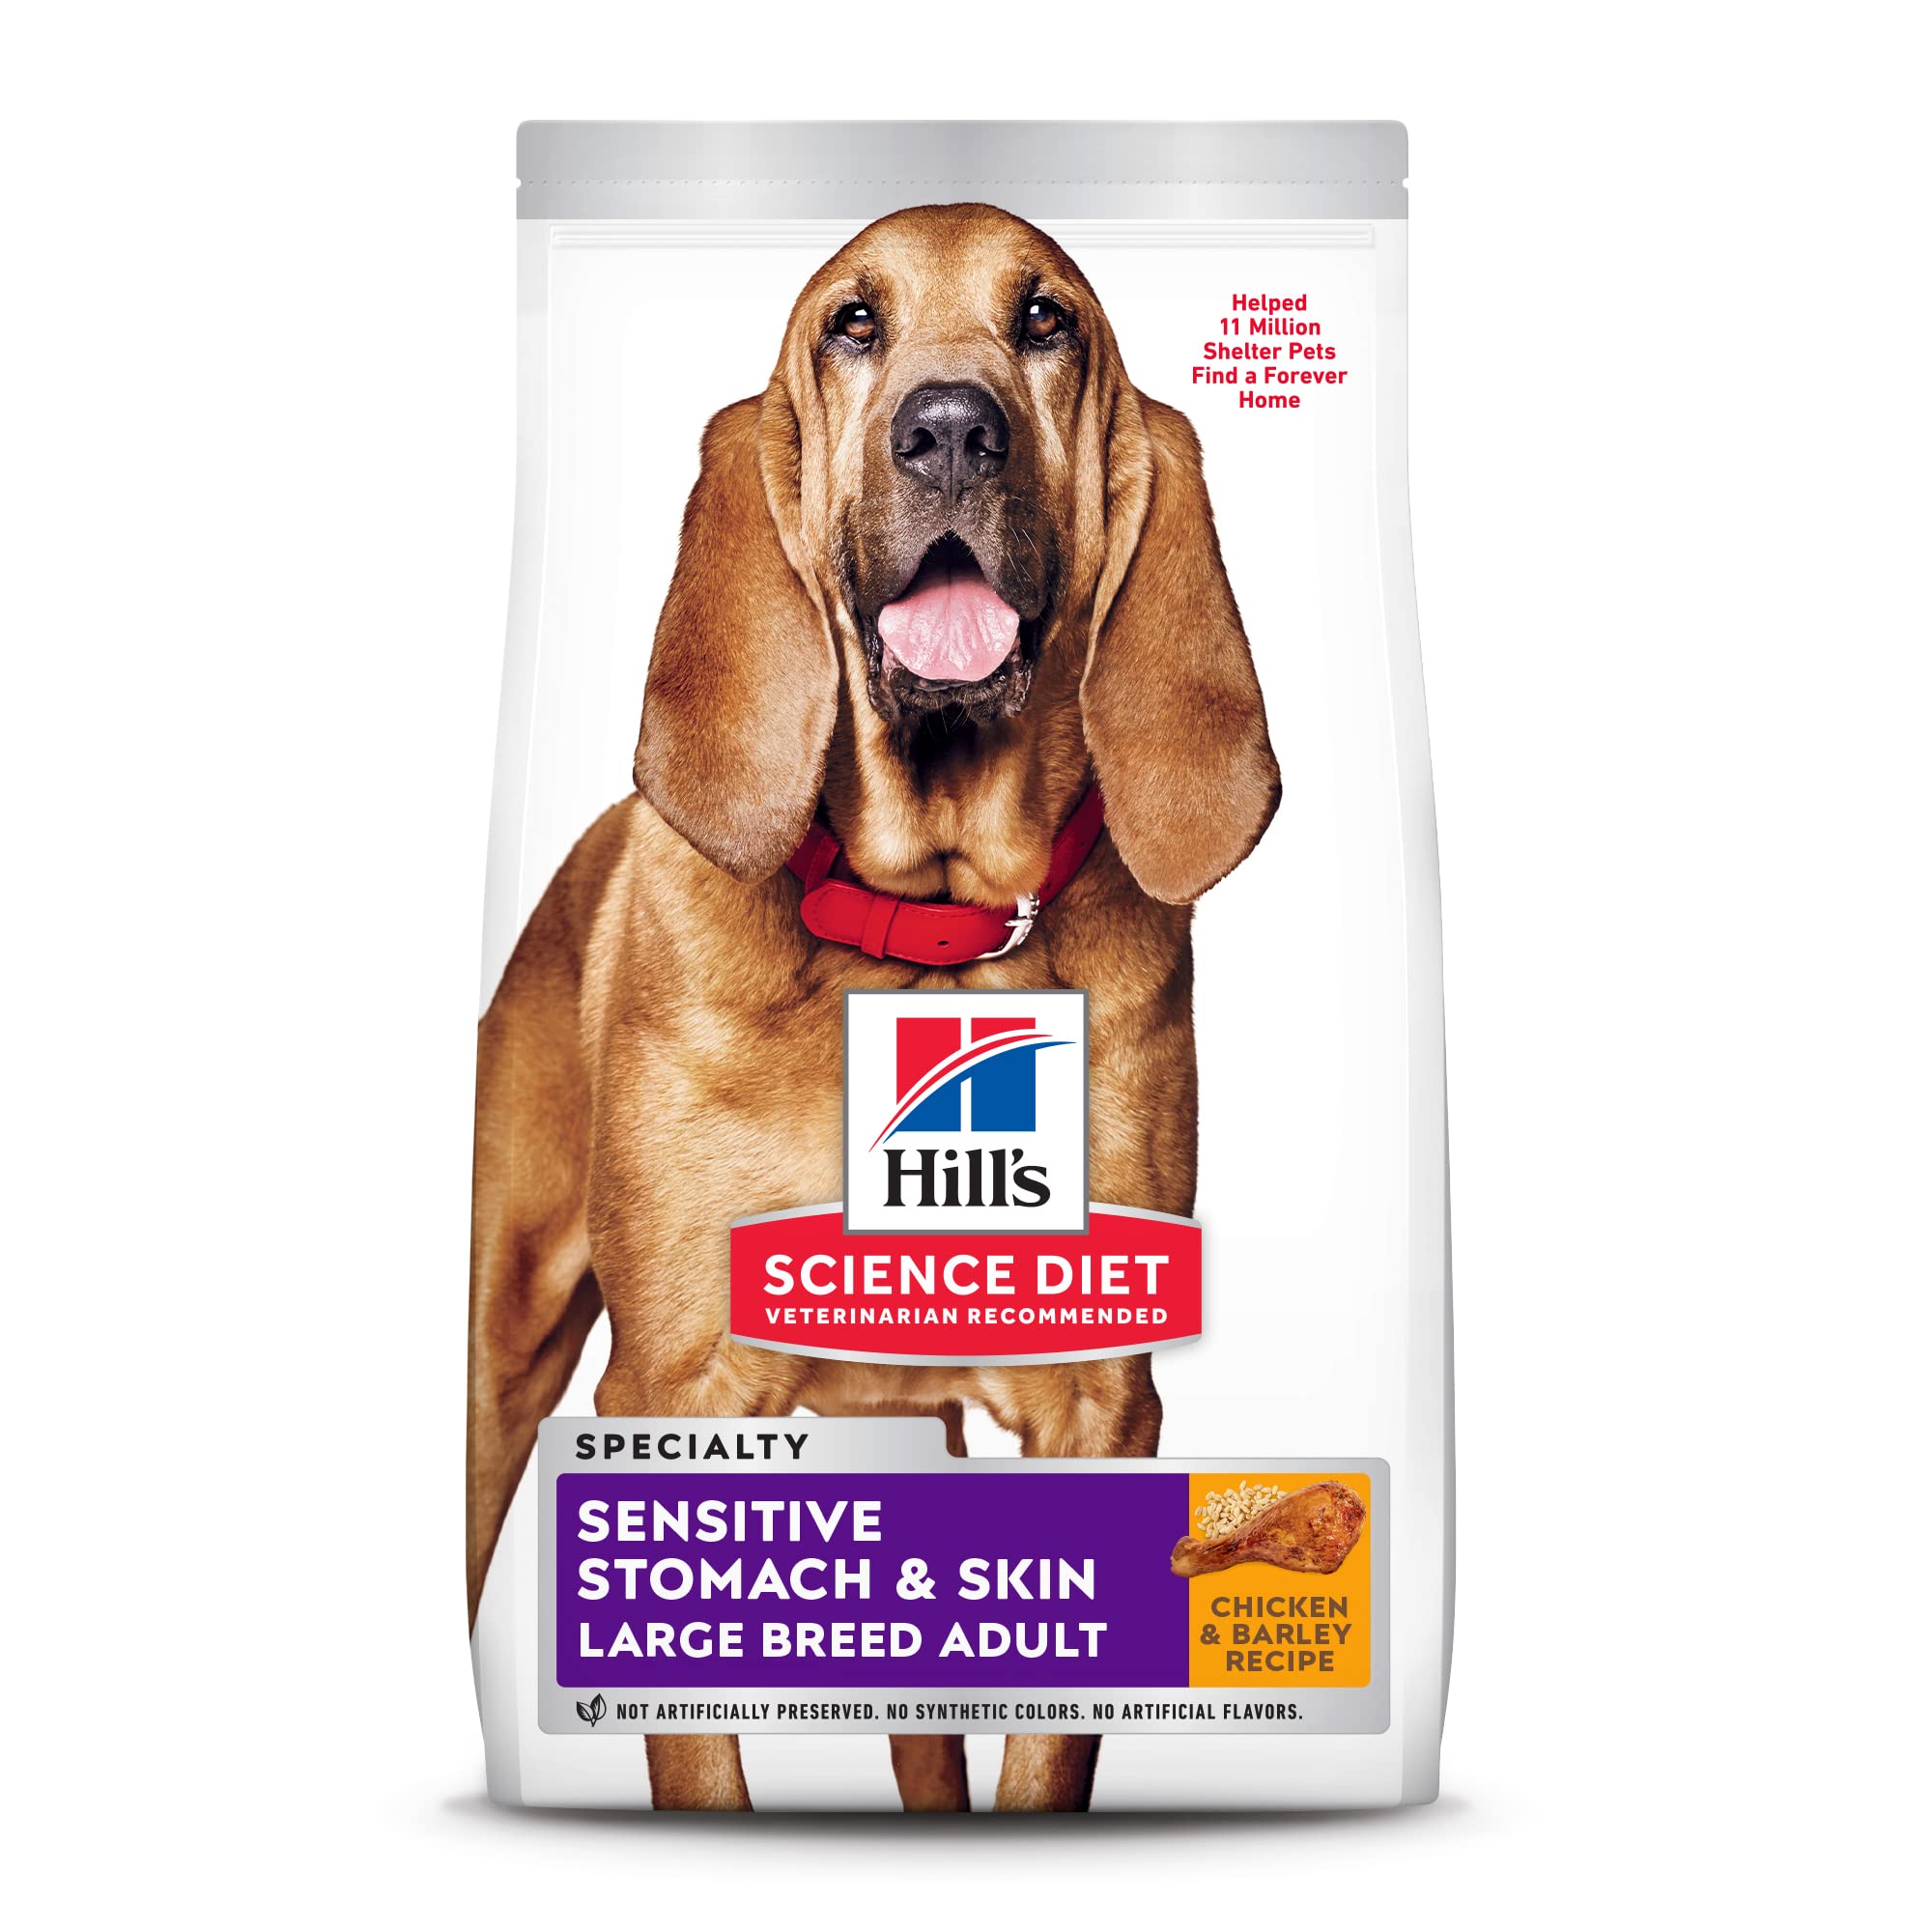 Hill's Science Diet Adult Sensitive Stomach And Skin Large Breed Dry Dog Food, Chicken Recipe, 30 lb. Bag